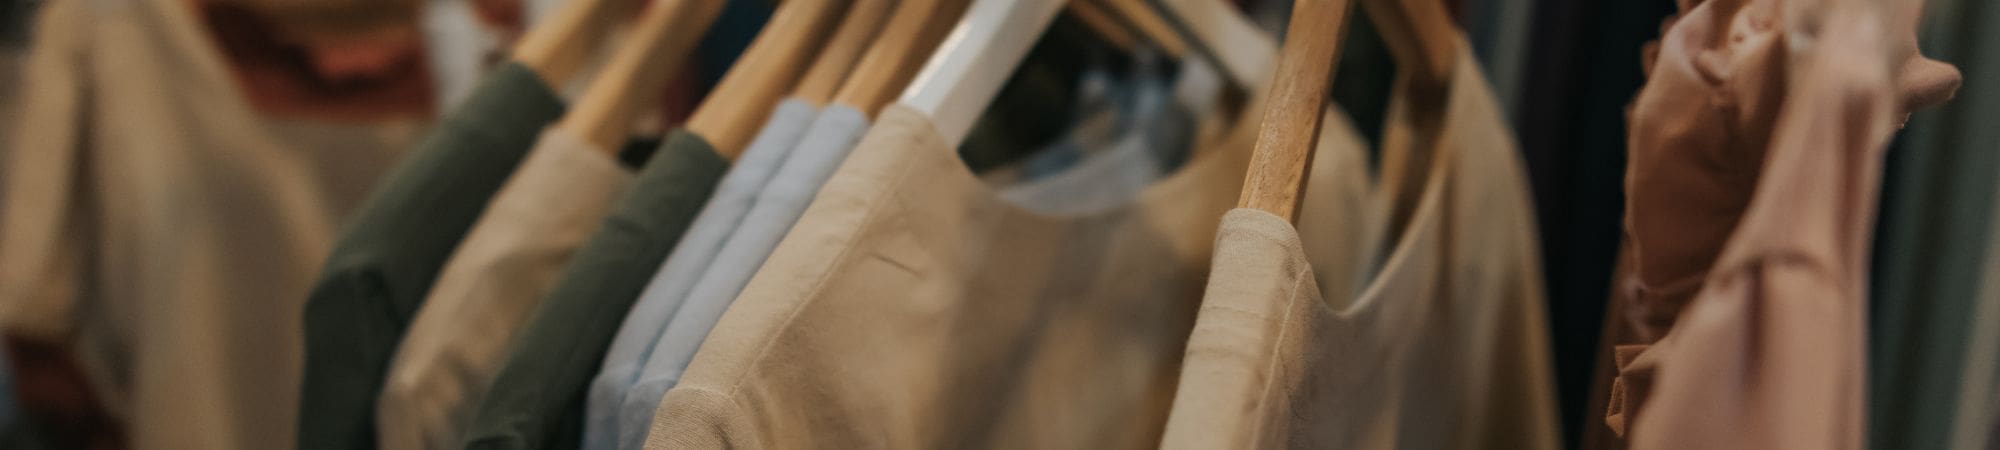 Fashion retailing: 3 key trends that brands should tap into to succeed